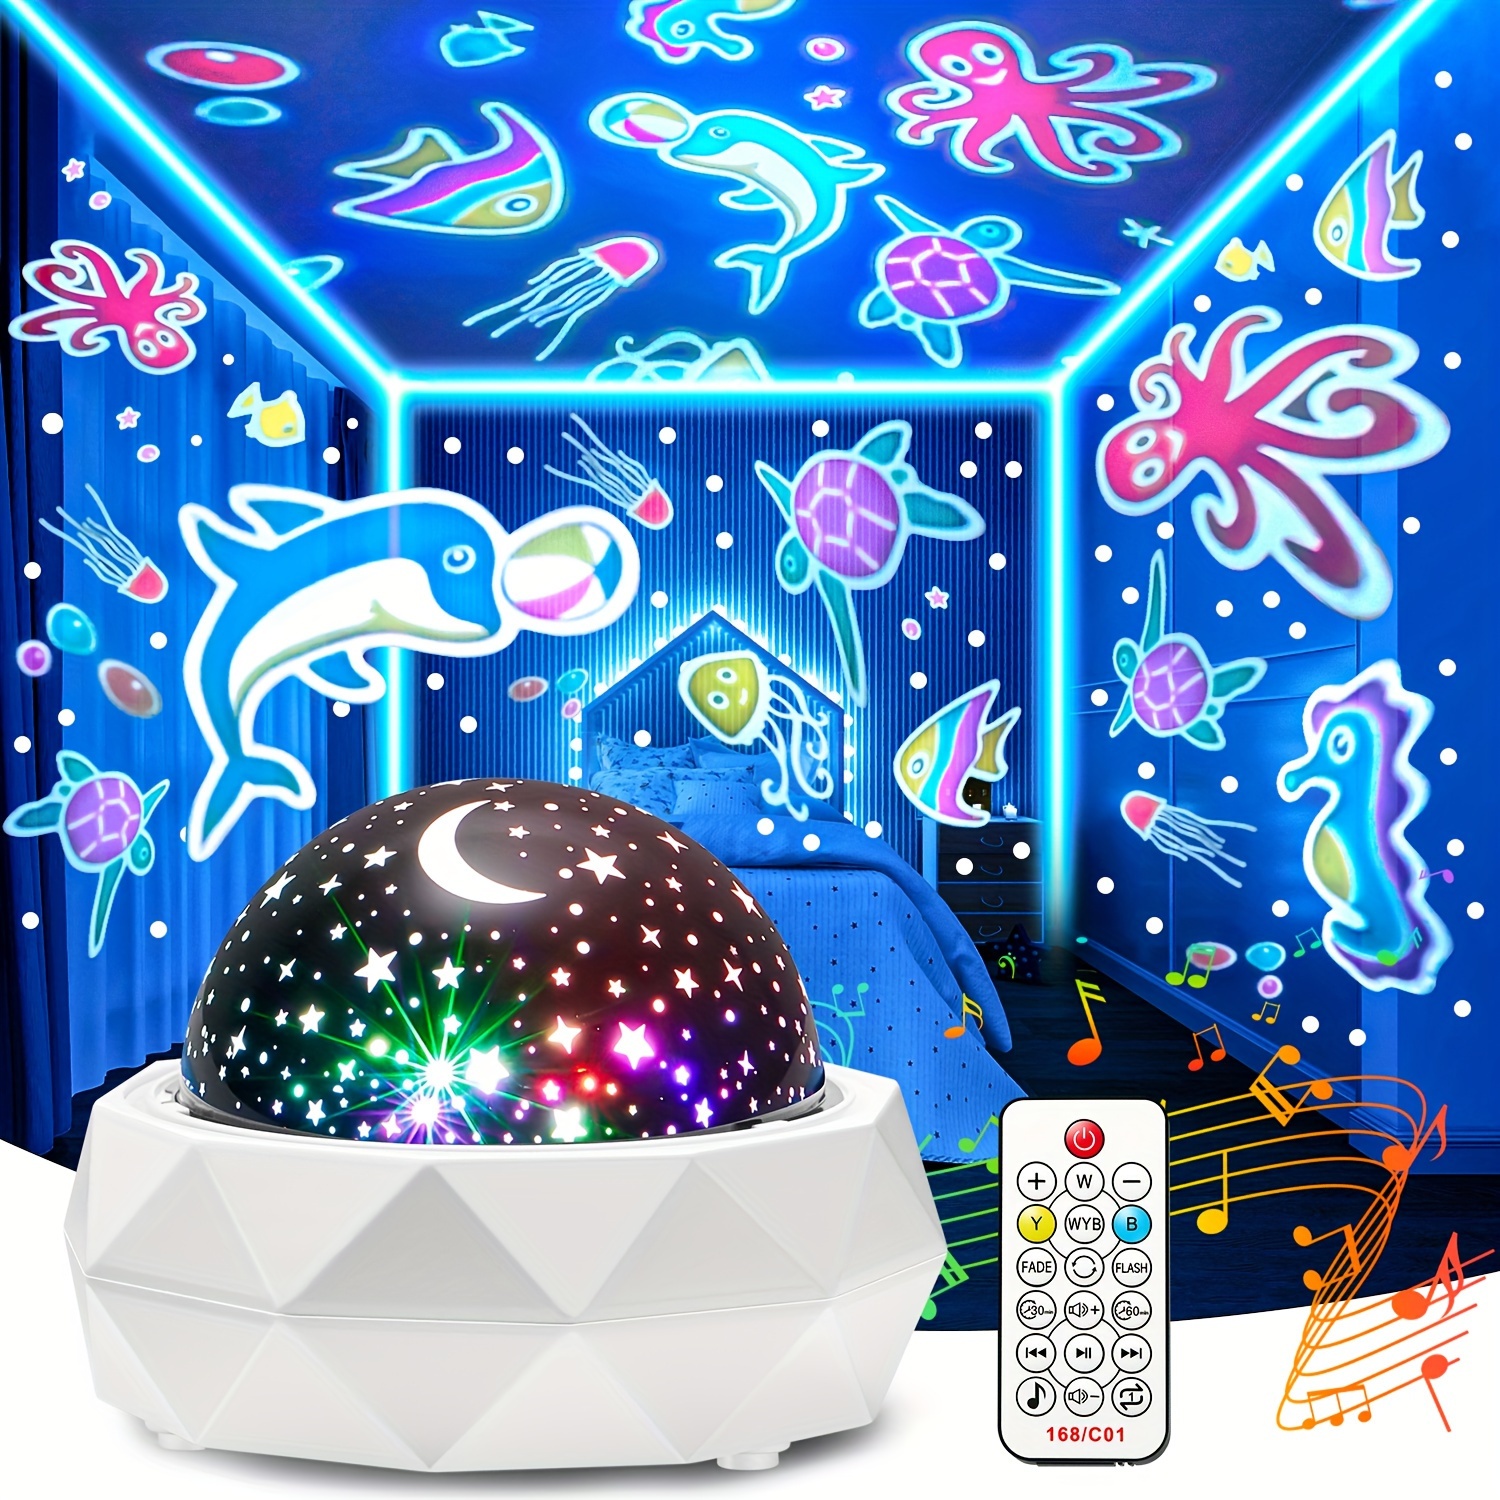 Children's Drawing Projector, Projection Painting Board, Space Shuttle Drawing  Projector, Rocket Ship Toy, Christmas Gift, New Year's Gift (batteries Not  Included), Shop Now For Limited-time Deals